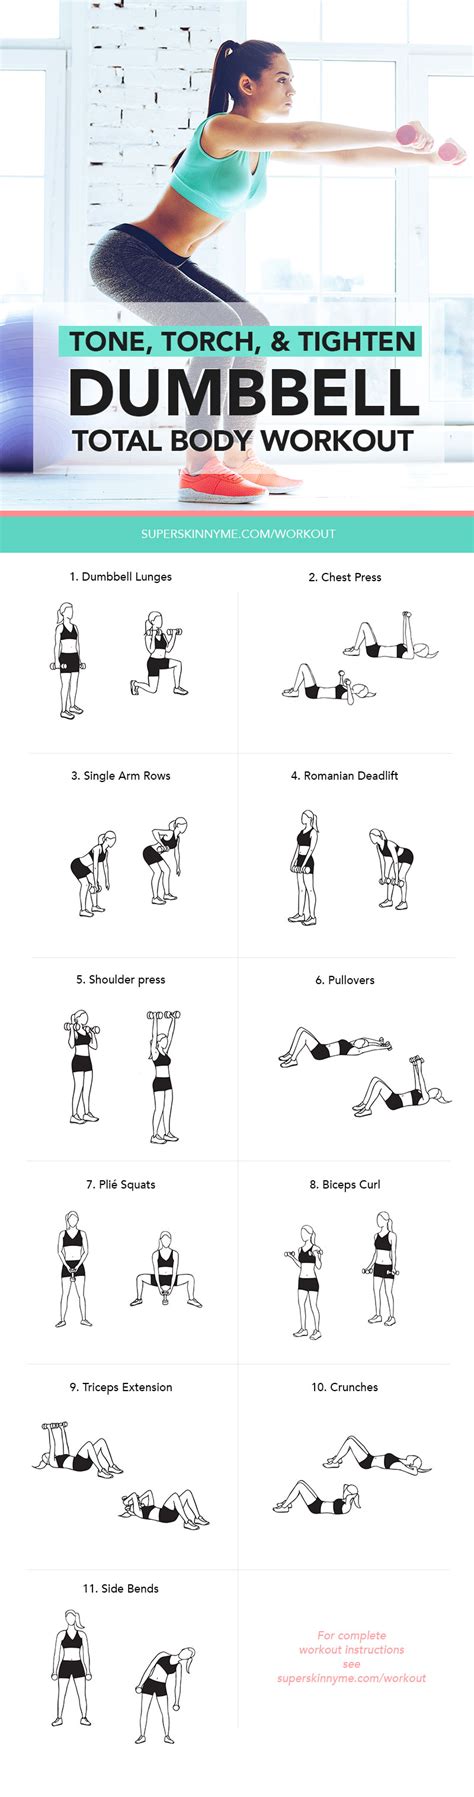 Total Body Workout Plan With Dumbbells Home Weight Loss Workout